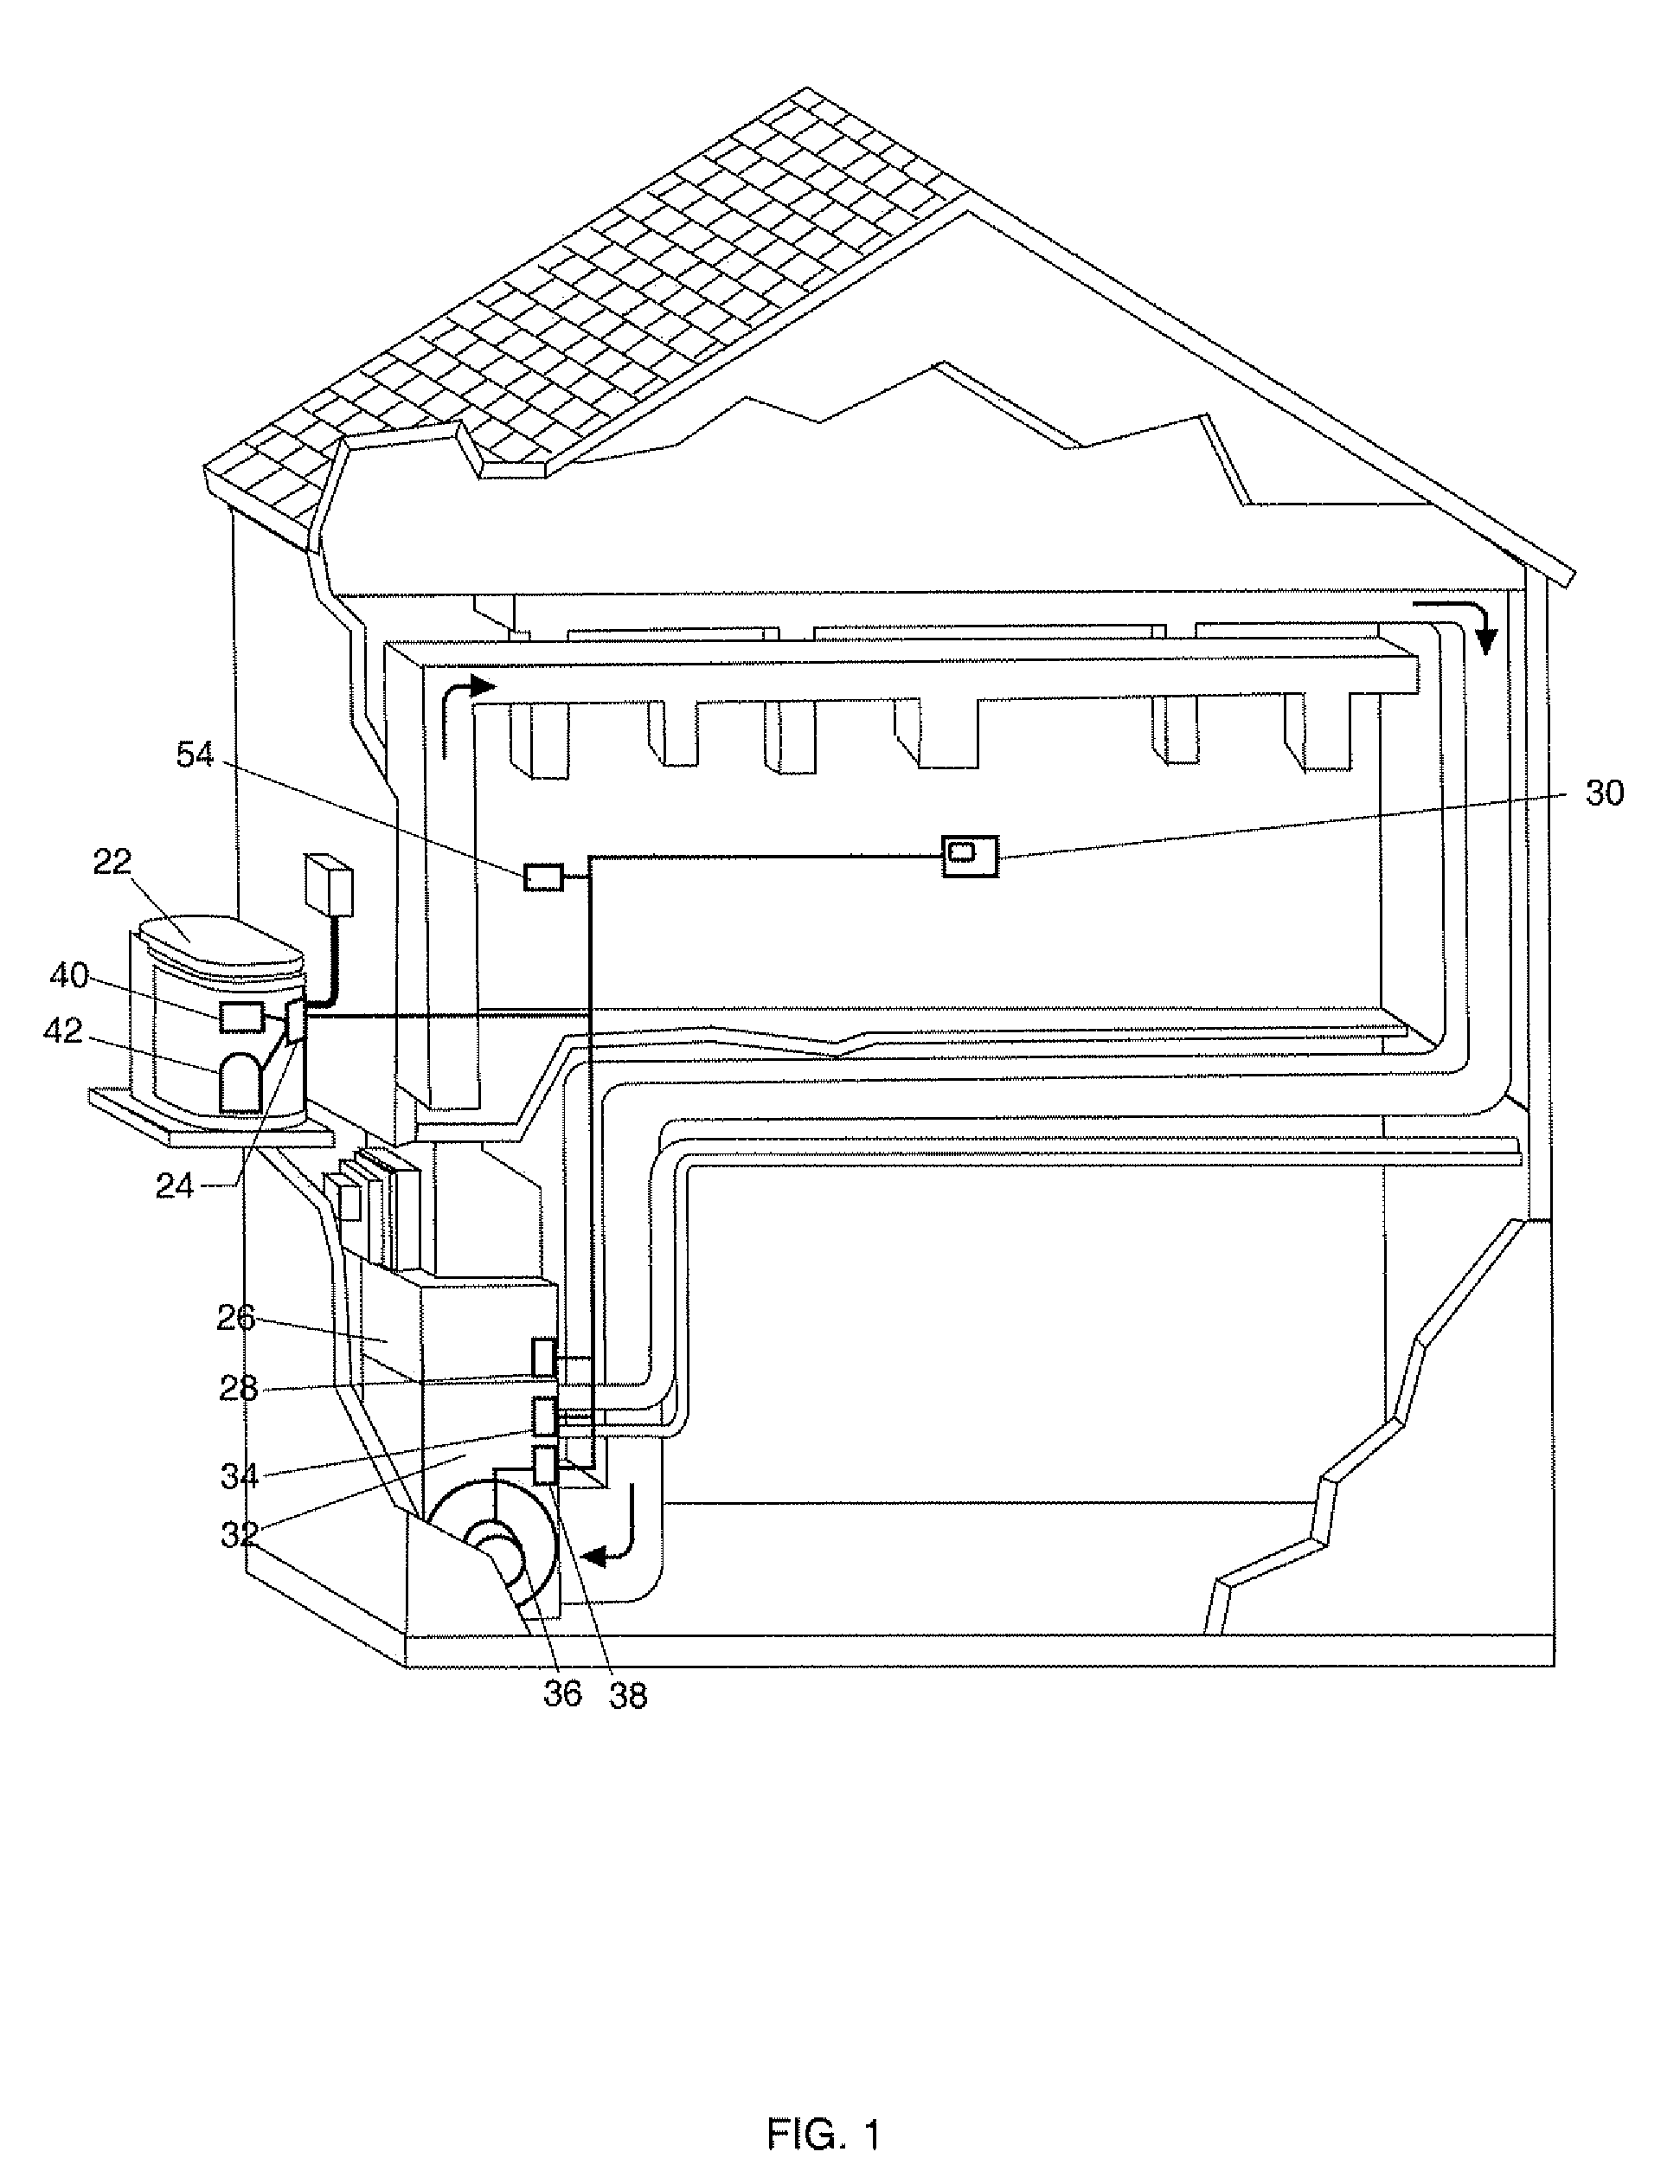 Control system protocol for an HVAC system